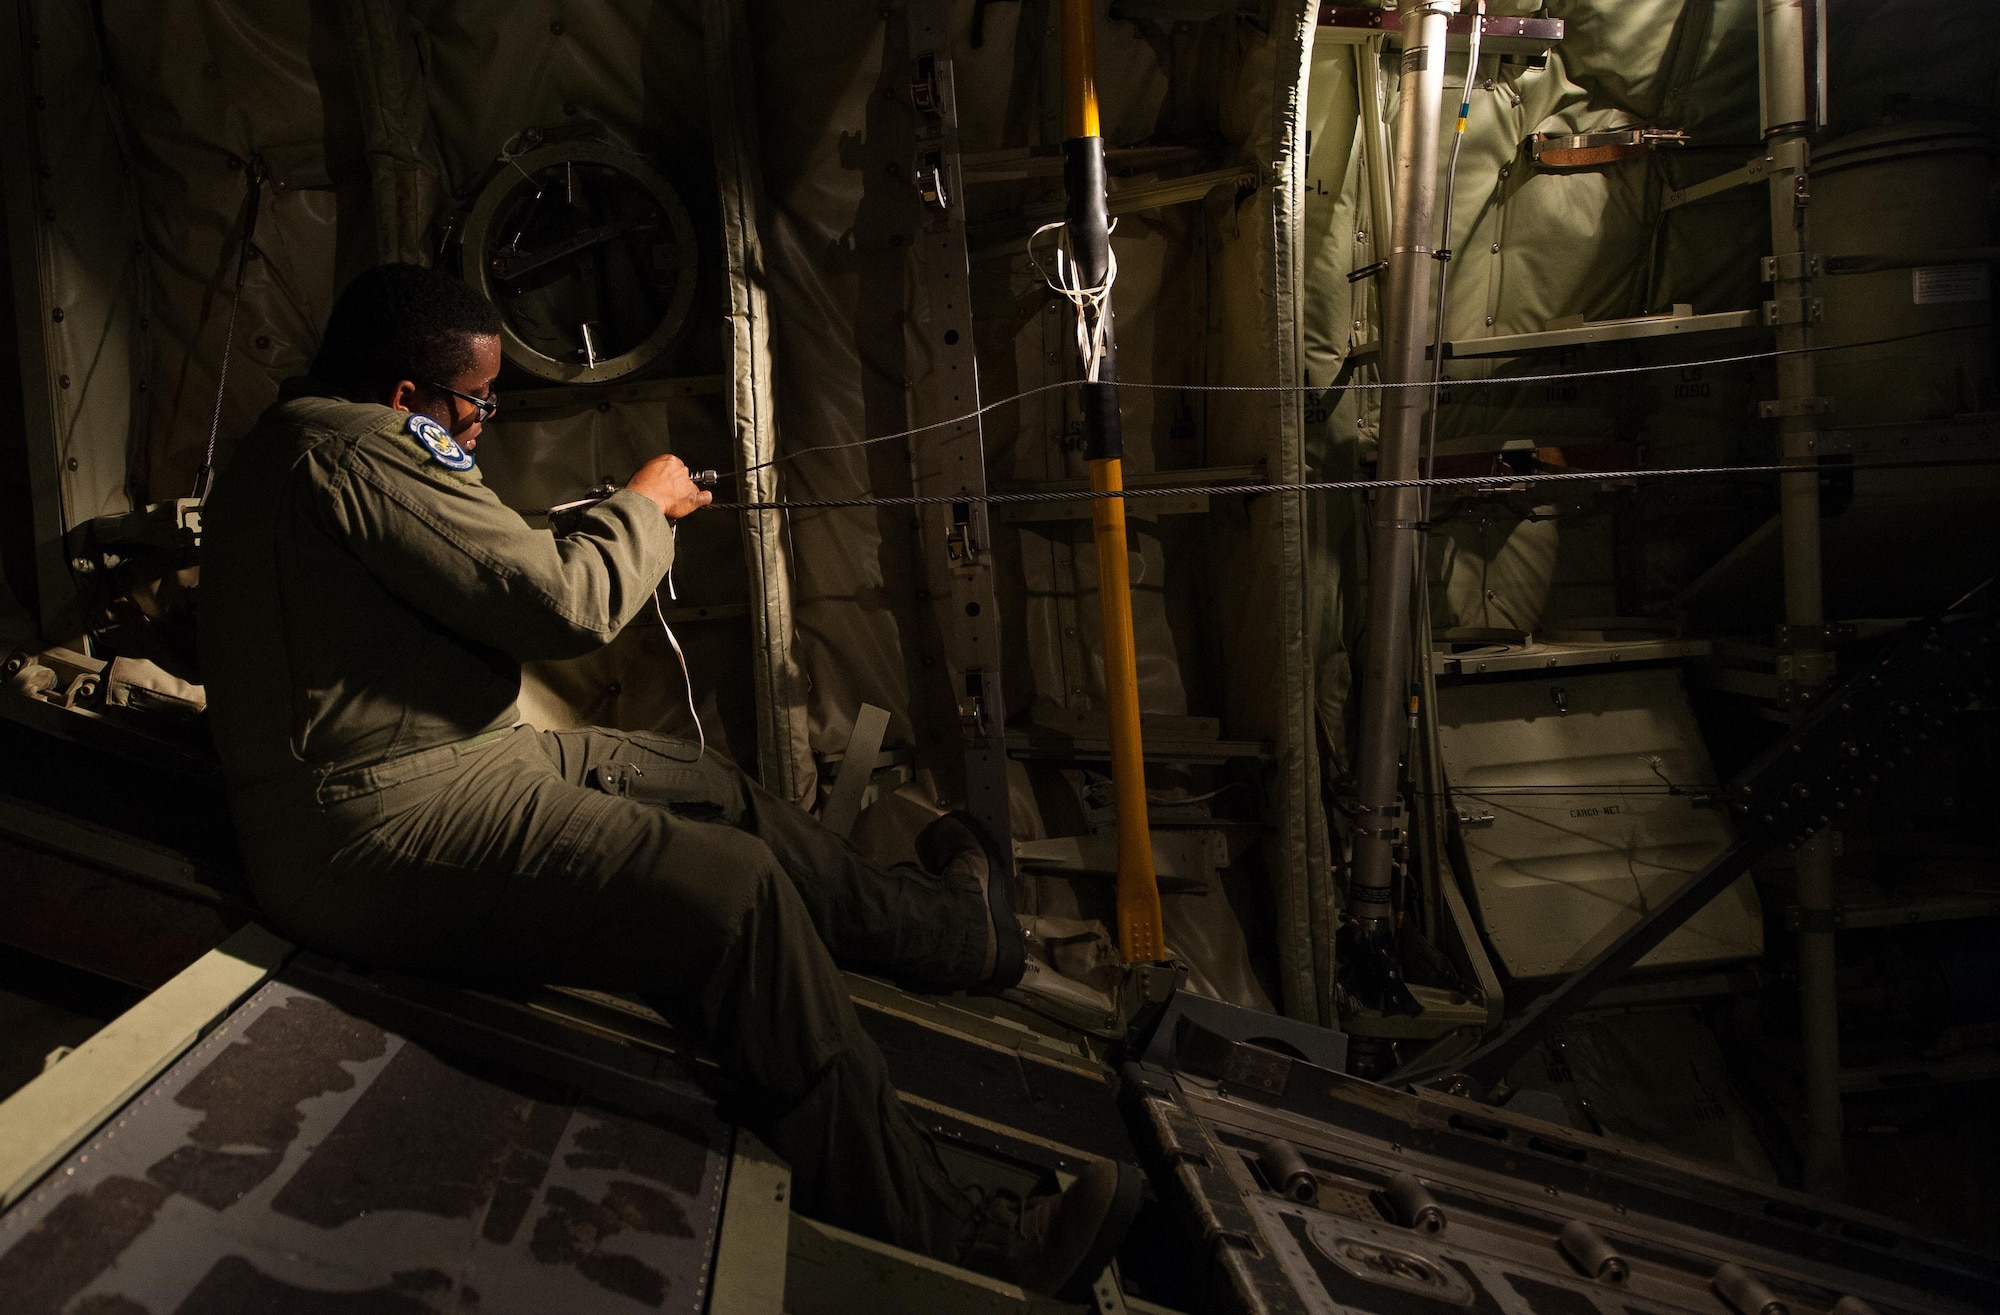 Senior Airman Warren Purnell, 37th Airlift Squadron loadmaster, prepares a C-130J Super Hercules for take-off during a Joint Airborne Air Transportability Training exercise June 30, 2016, at Ramstein Air Base, Germany. Airmen maintain their sharp on-the-job skills by performing these JA/ATT exercises frequently, ensuring that the mission can continue without a hiccup. (U.S. Air force photo/Airman 1st Class Lane T. Plummer)